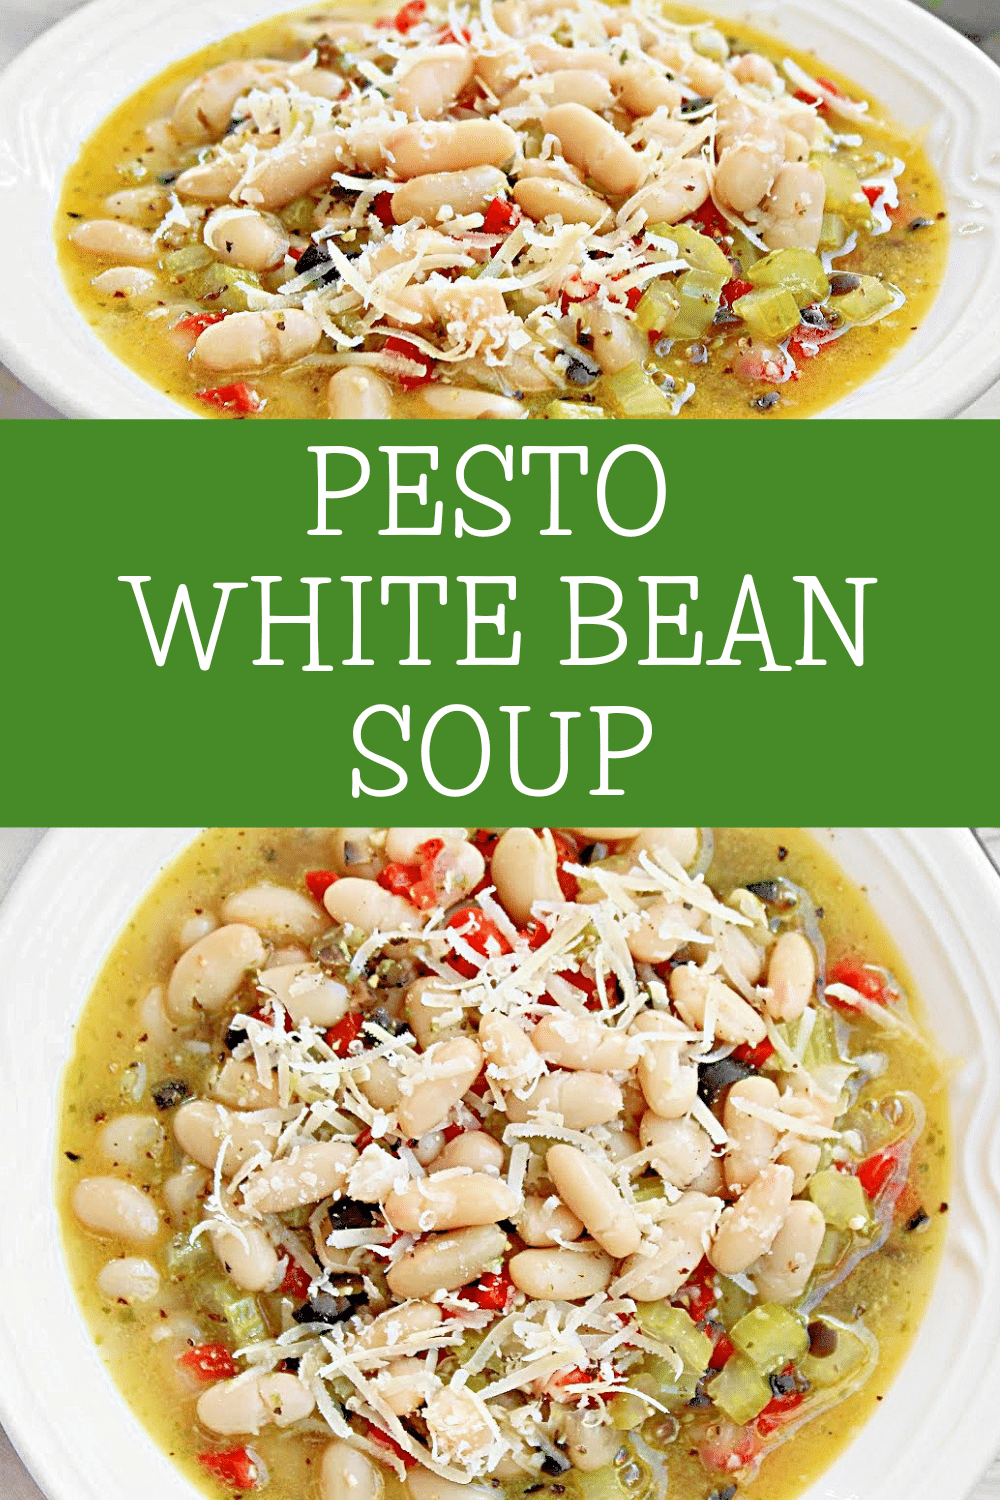 Pesto White Bean Soup ~ Hearty Italian-inspired soup that combines the creamy goodness of white beans with the zesty flavors of pesto. #plantbased #vegetarian #vegan via @thiswifecooks